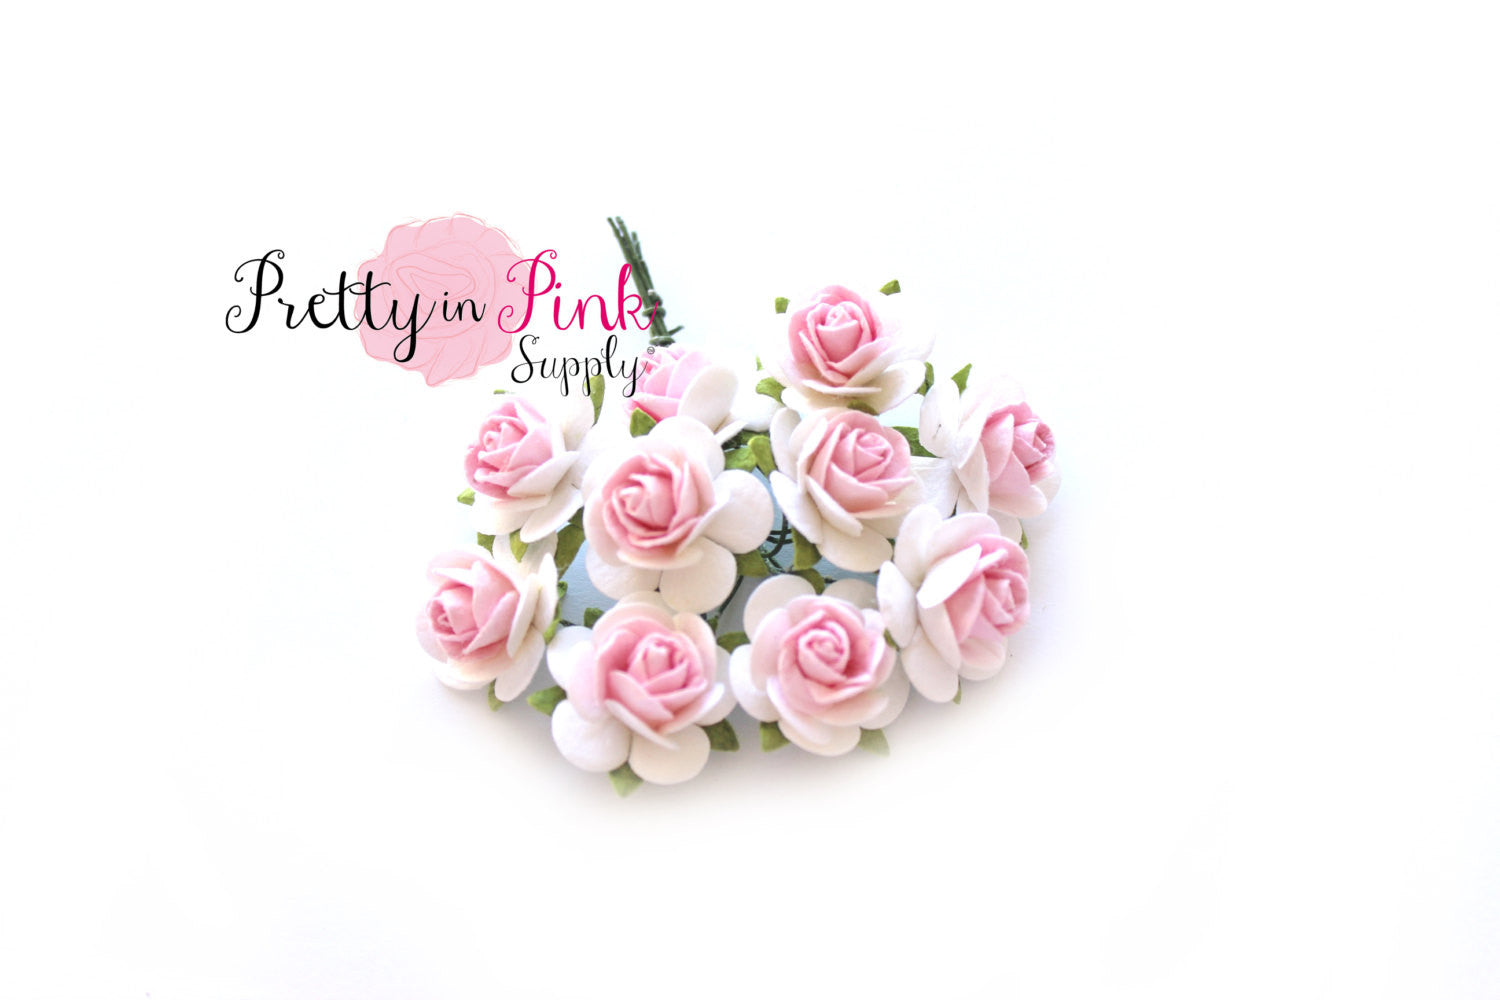 3/4" White with Pale Pink Center Premium Paper Flowers - Pretty in Pink Supply